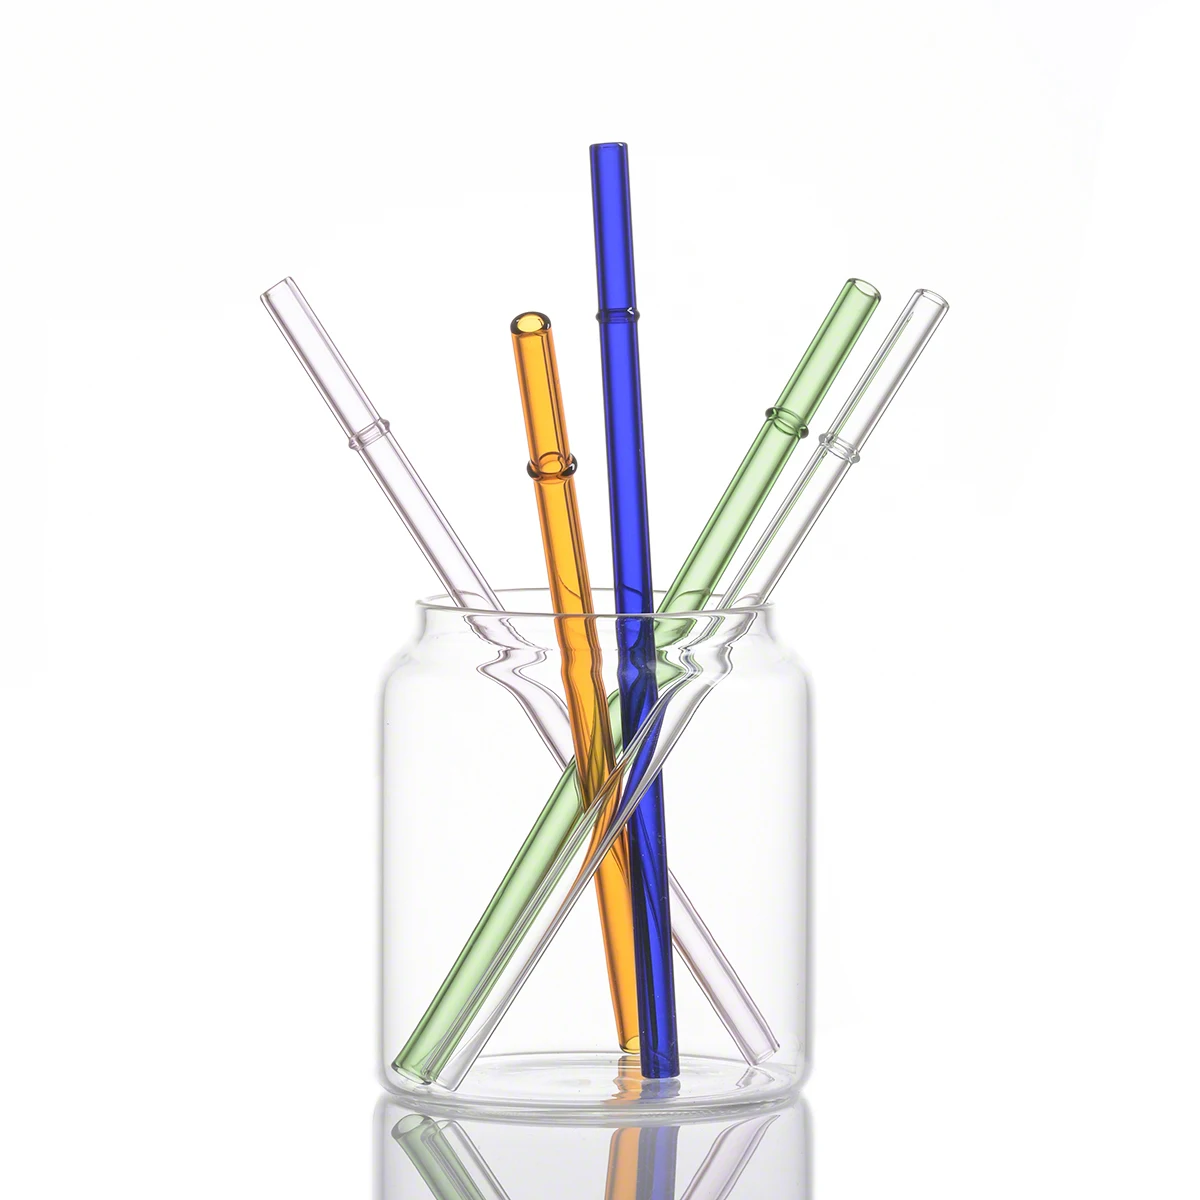 OD 8mm x L19.5cm Straight Bamboo Joint Design Borosilicate Glass Drinking Straws With Cleaning Brush